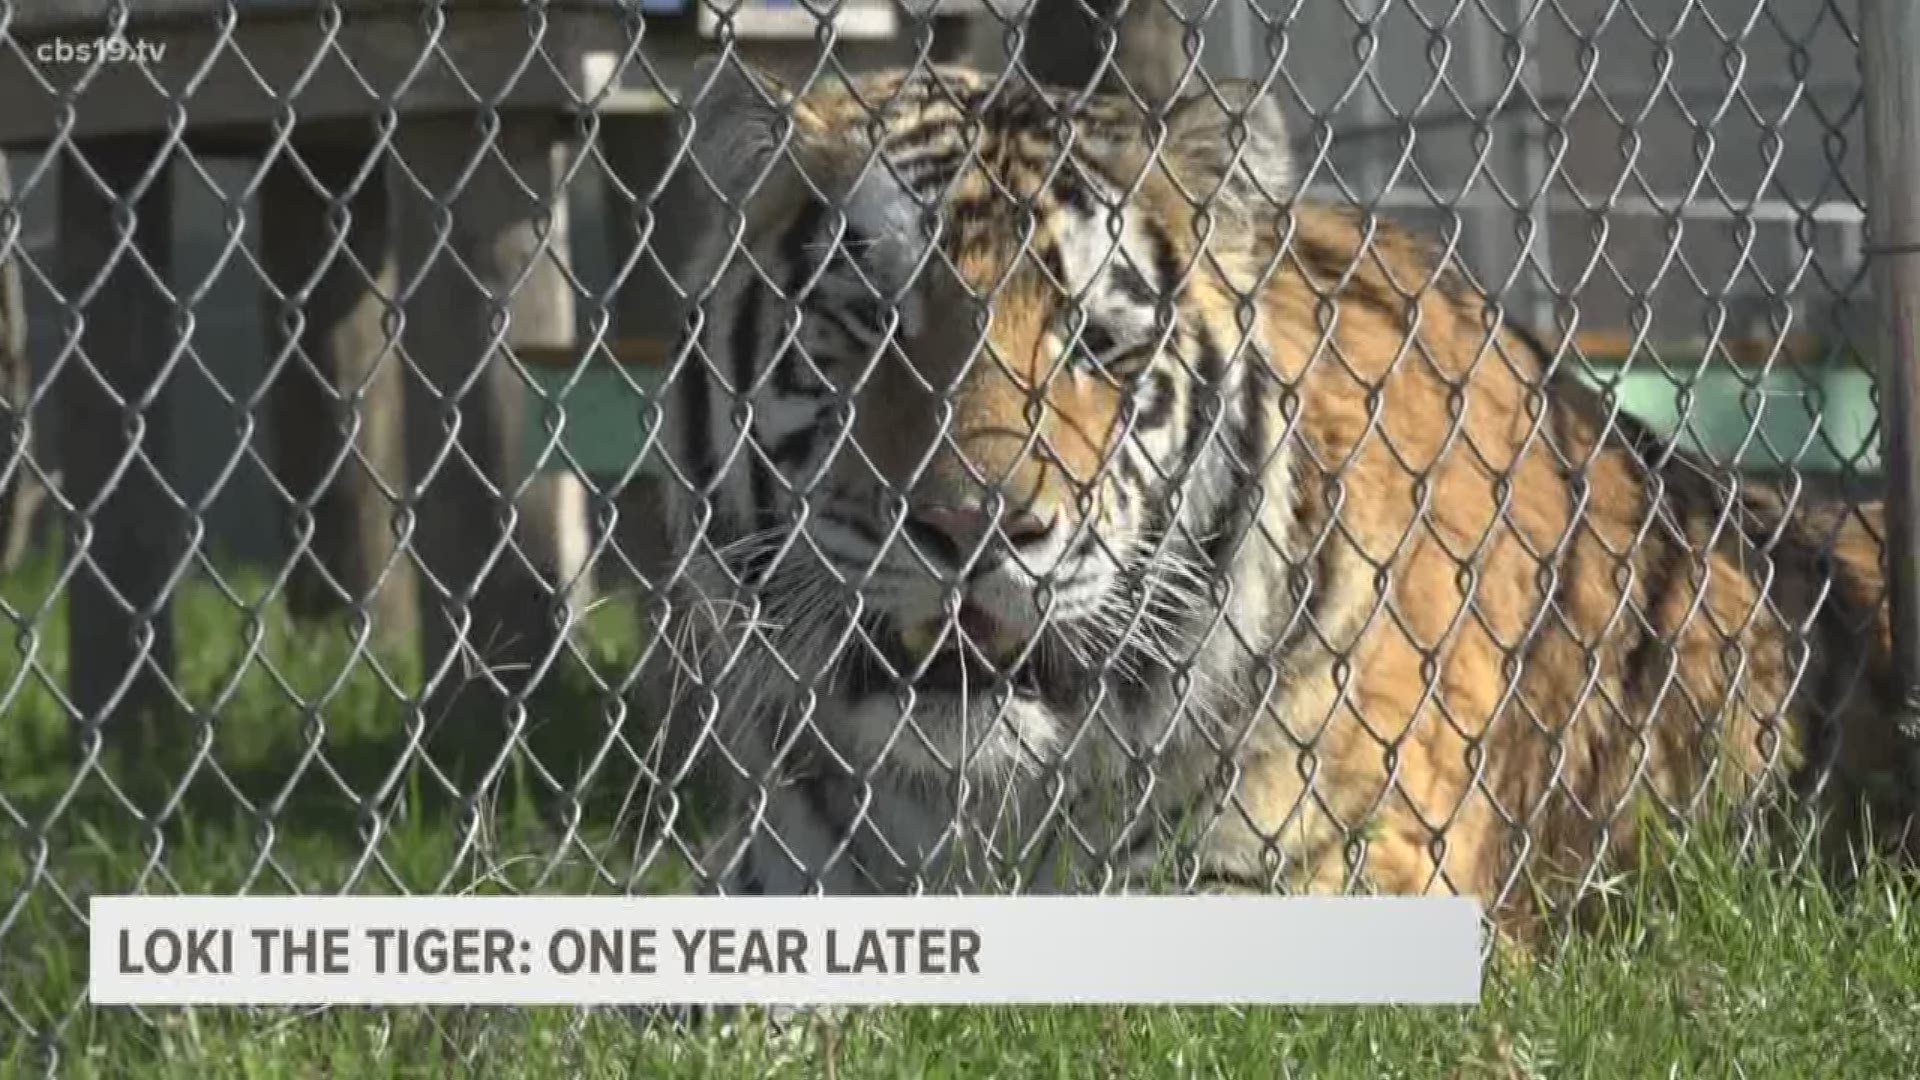 Loki the tiger made national news when he was discovered in an abandoned house in Houston. He is now happy and healthy at the Cleveland Amory Black Beauty Ranch.